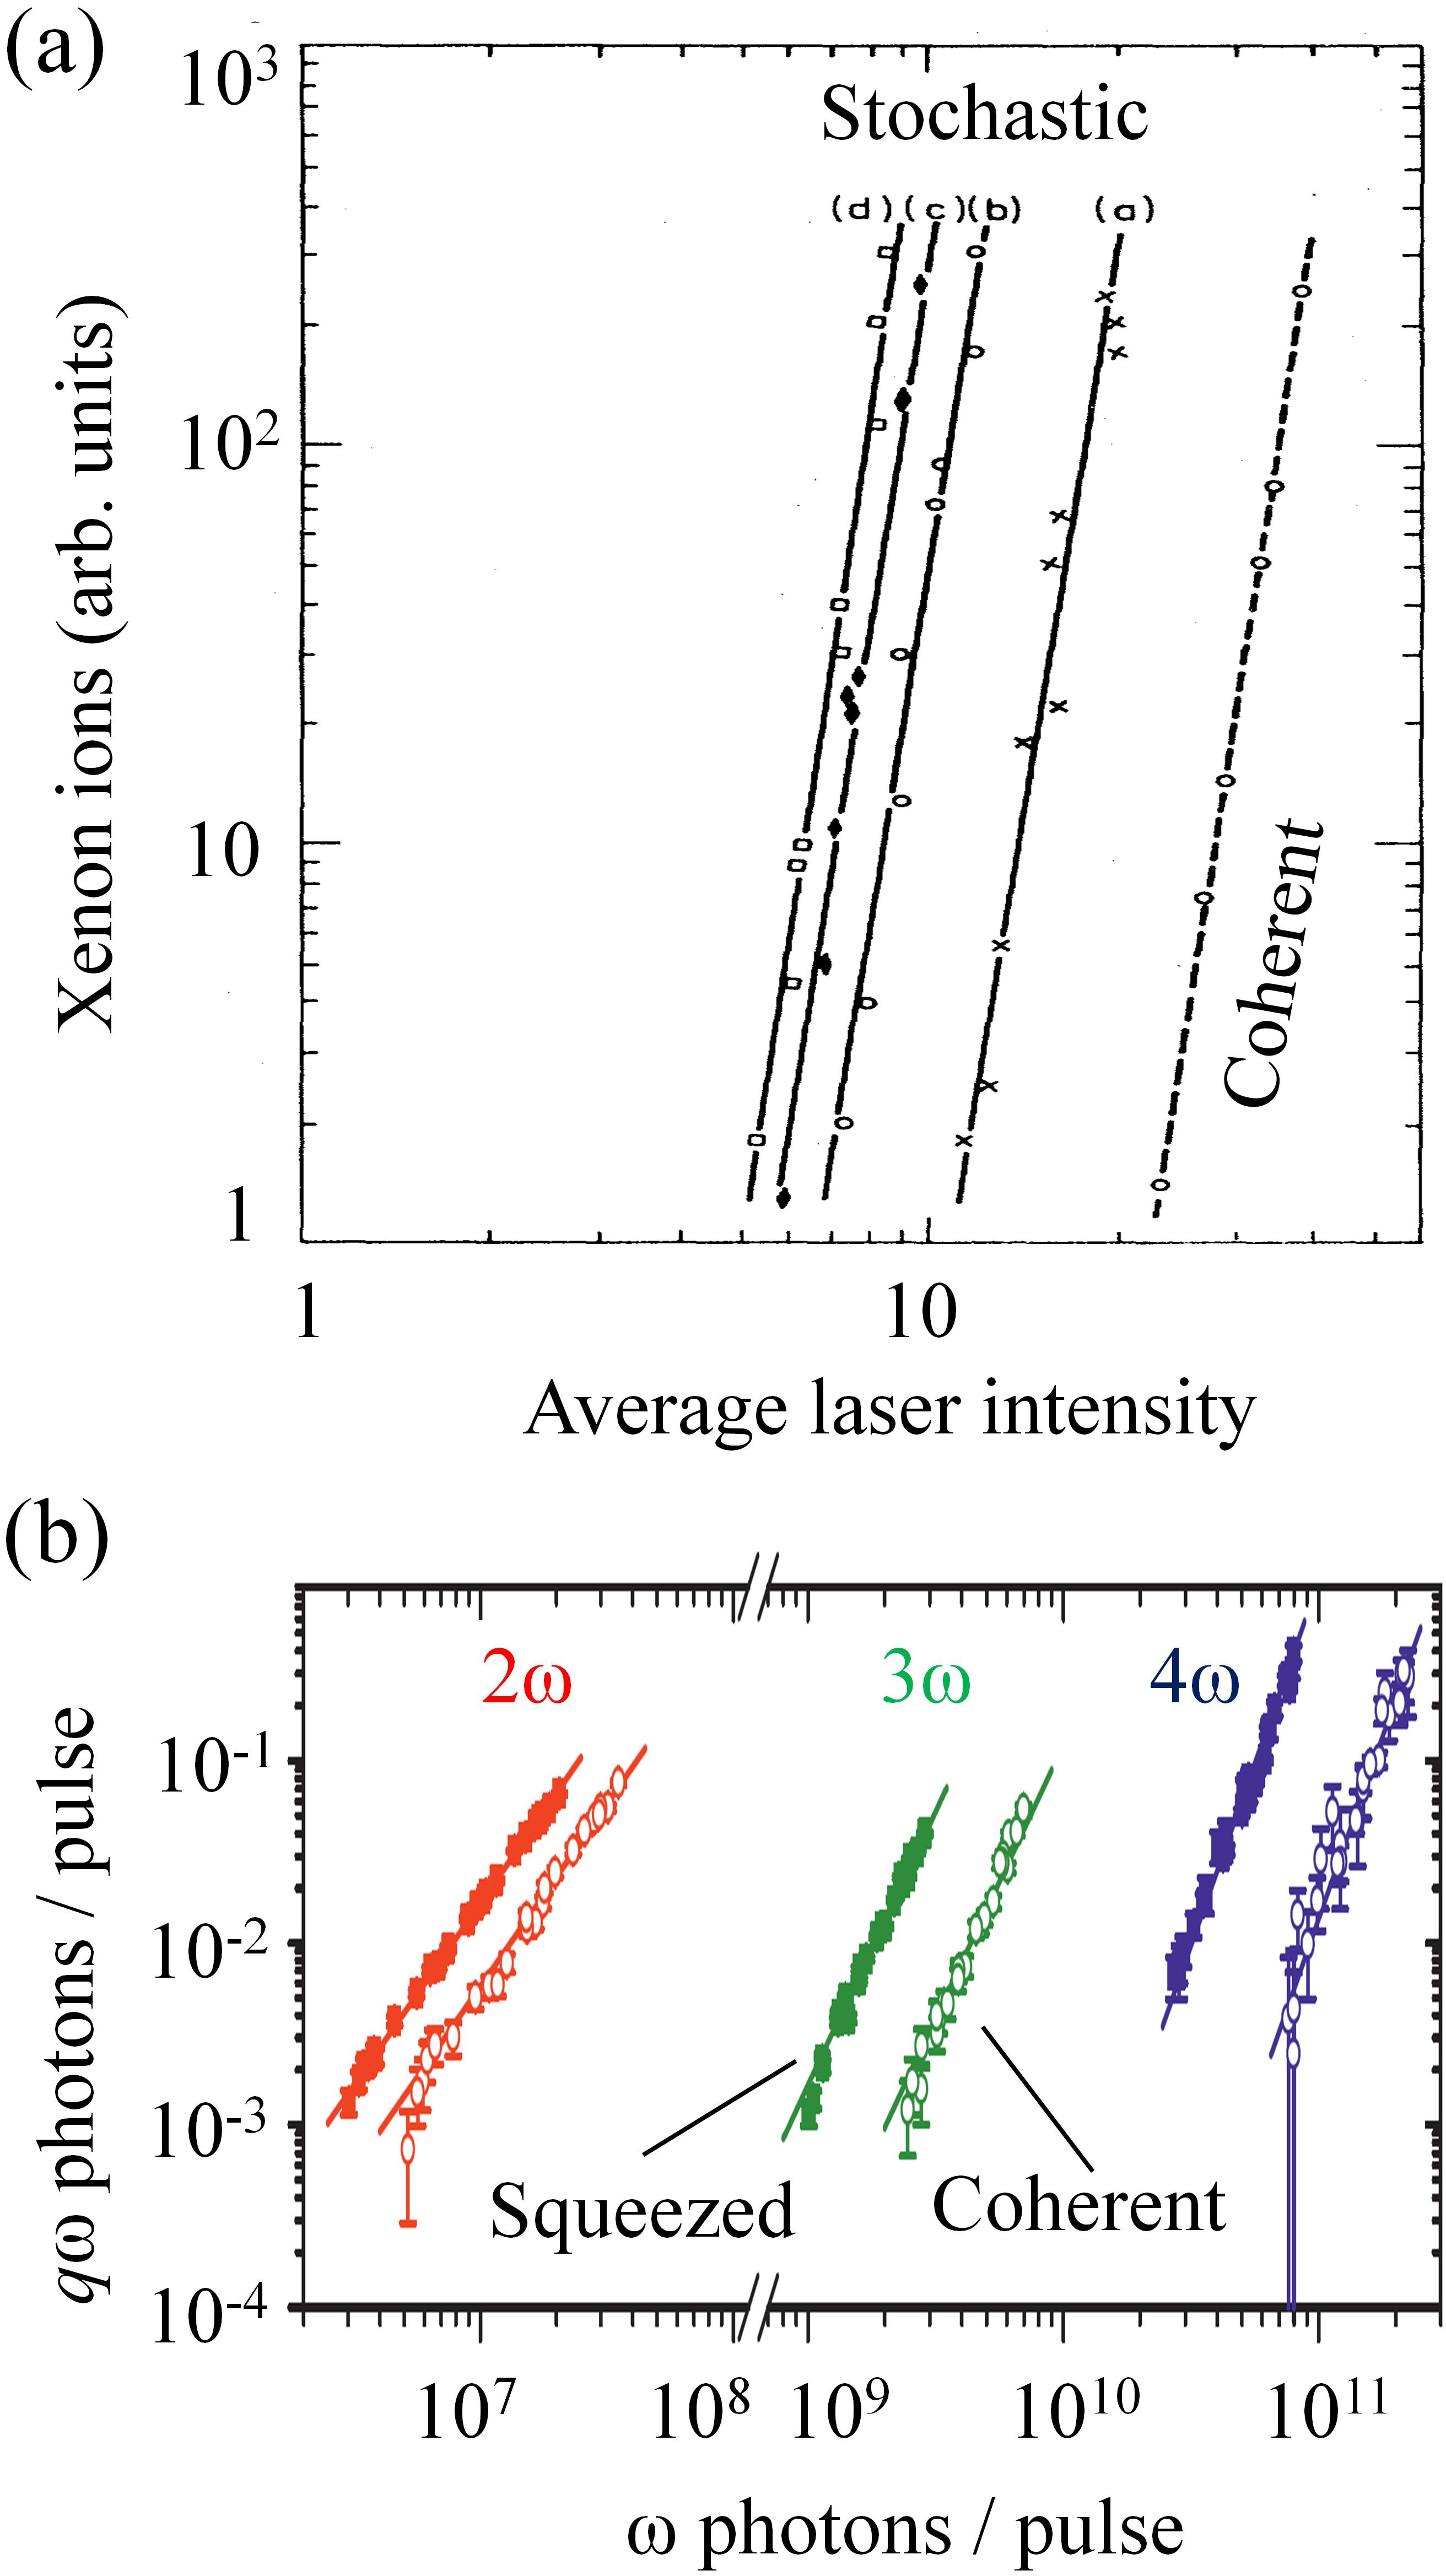 (a) Dependence of the 11-photon multiphoton ionization of Xe on the intensity of a coherent and stochastic light field operating with 10, 30, 70, and 100 phase-unlocked modes (shown with a, b, c, and d in the graph). (b) Dependence of the harmonic yield, produced by nonlinear processes in a crystal, on the intensity of a vacuum squeezed (solid squares) and a coherent (open circles) light states. Parts (a) and (b) are reproduced from Refs. [57] and [28], respectively.